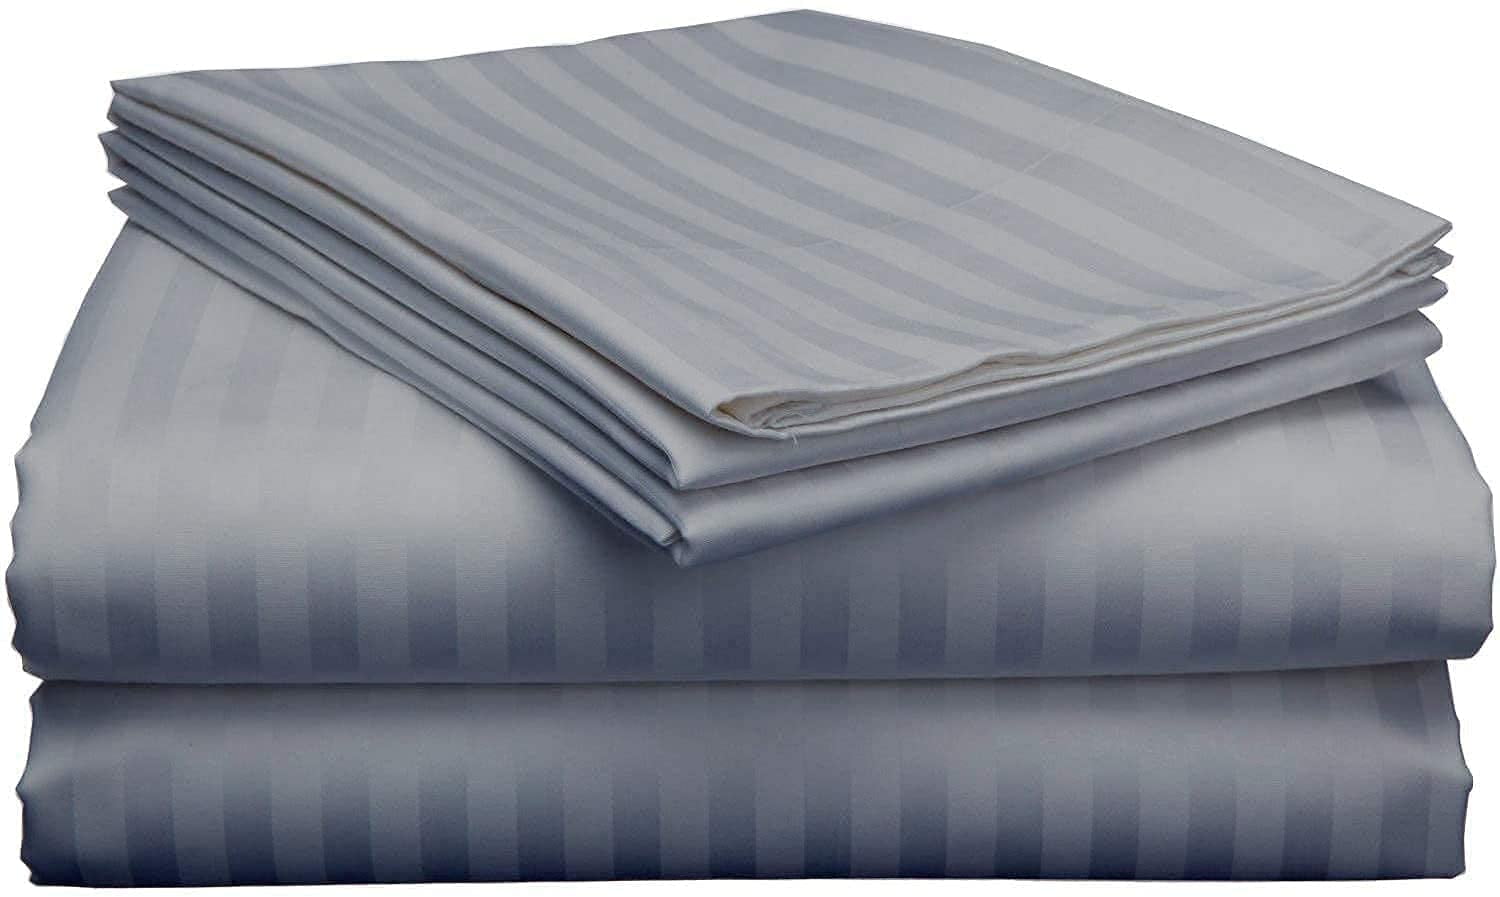 King Waterbed Attached Sheet Set 100% Cotton T-275 Made In The USA 